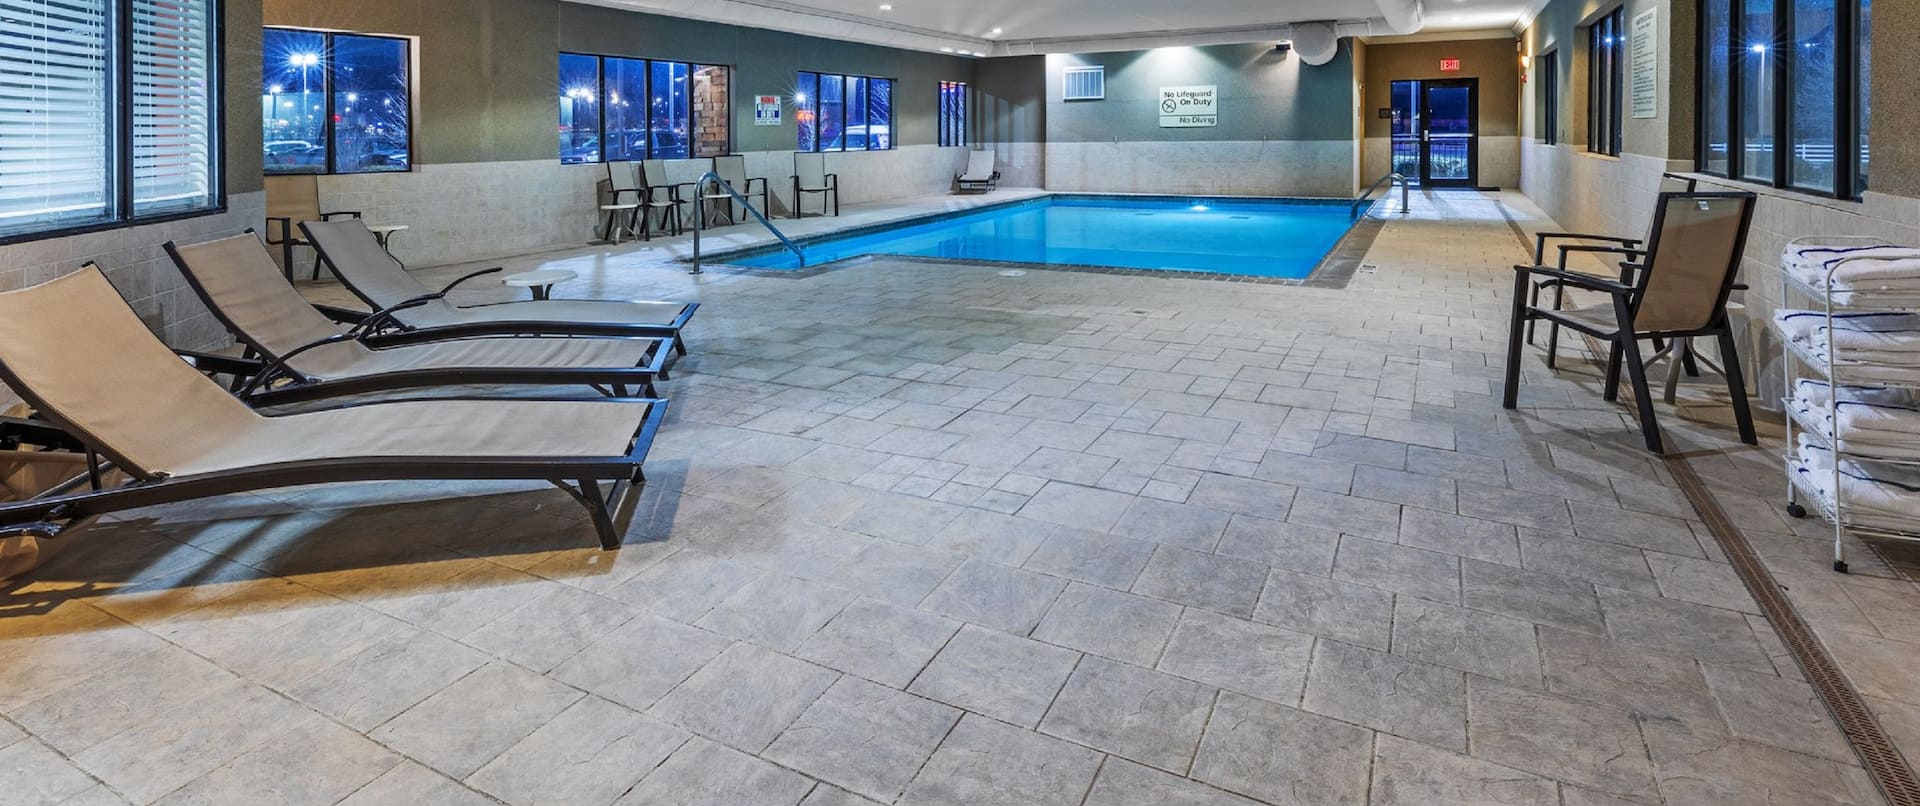 Indoor Pool with Poolside Chairs